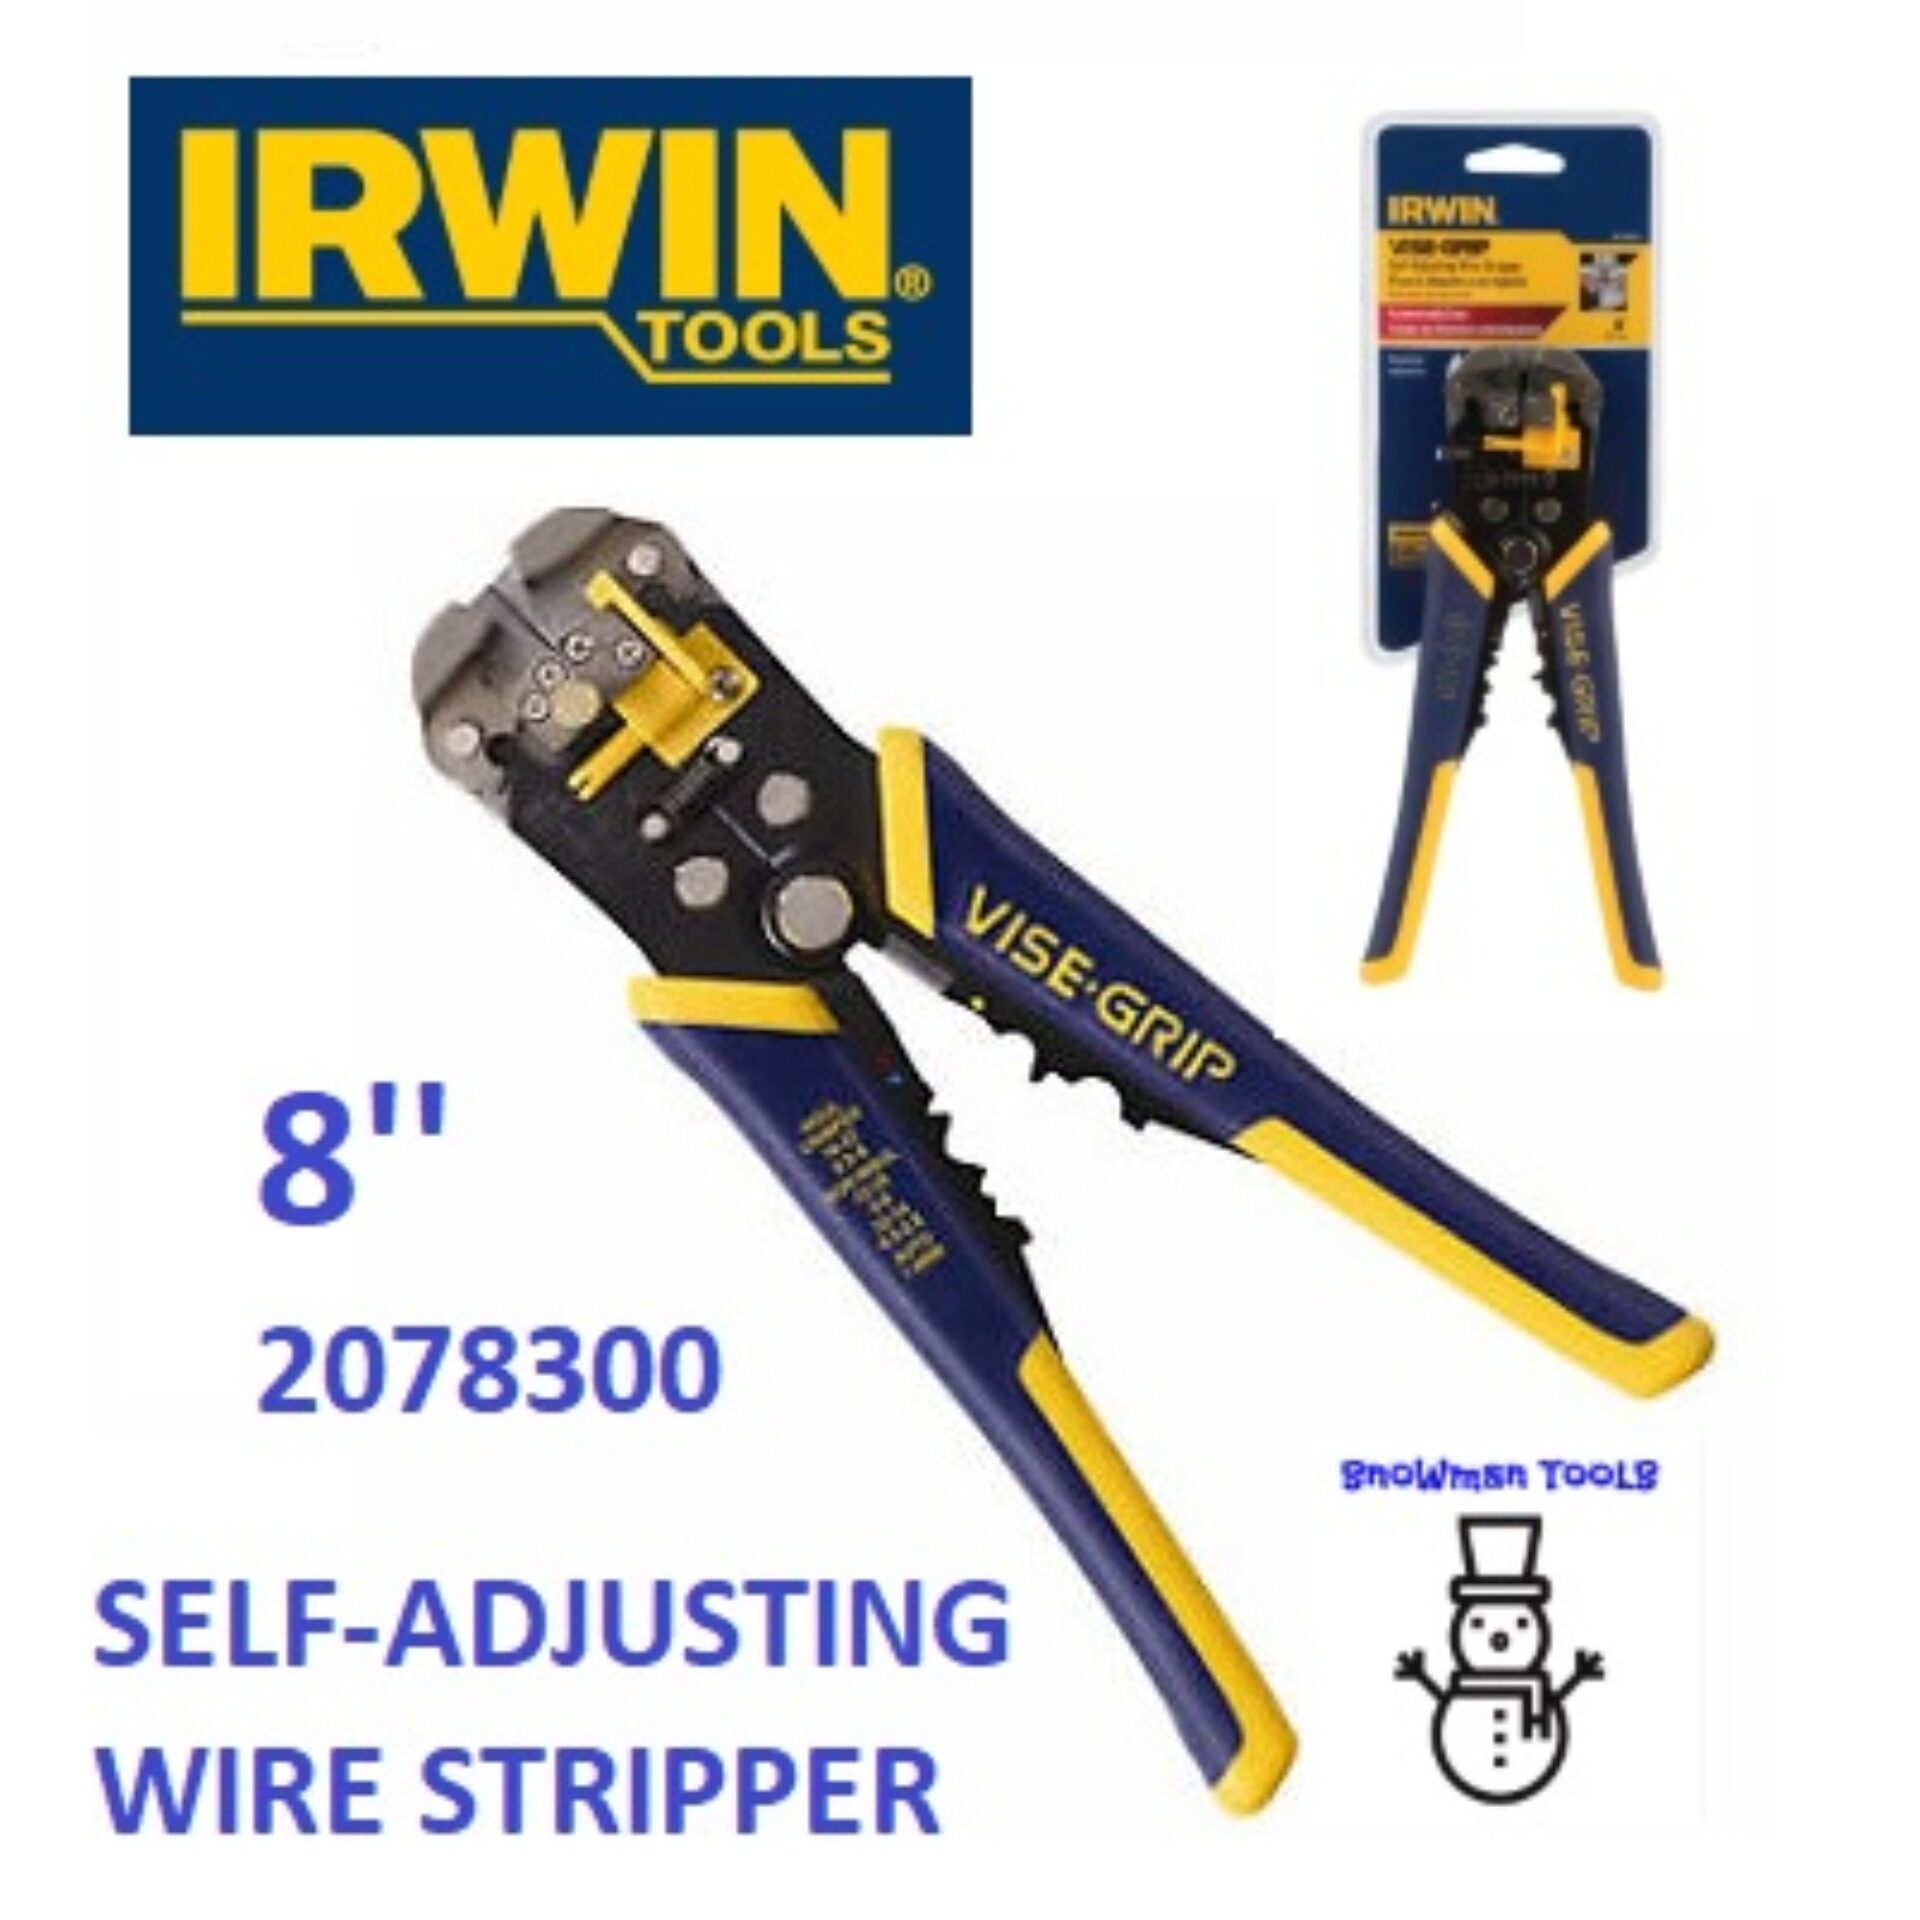 IRWIN TOOLS 2078300 Vise Grip Self Adjusting Wire 8 inch Stripper for sale online